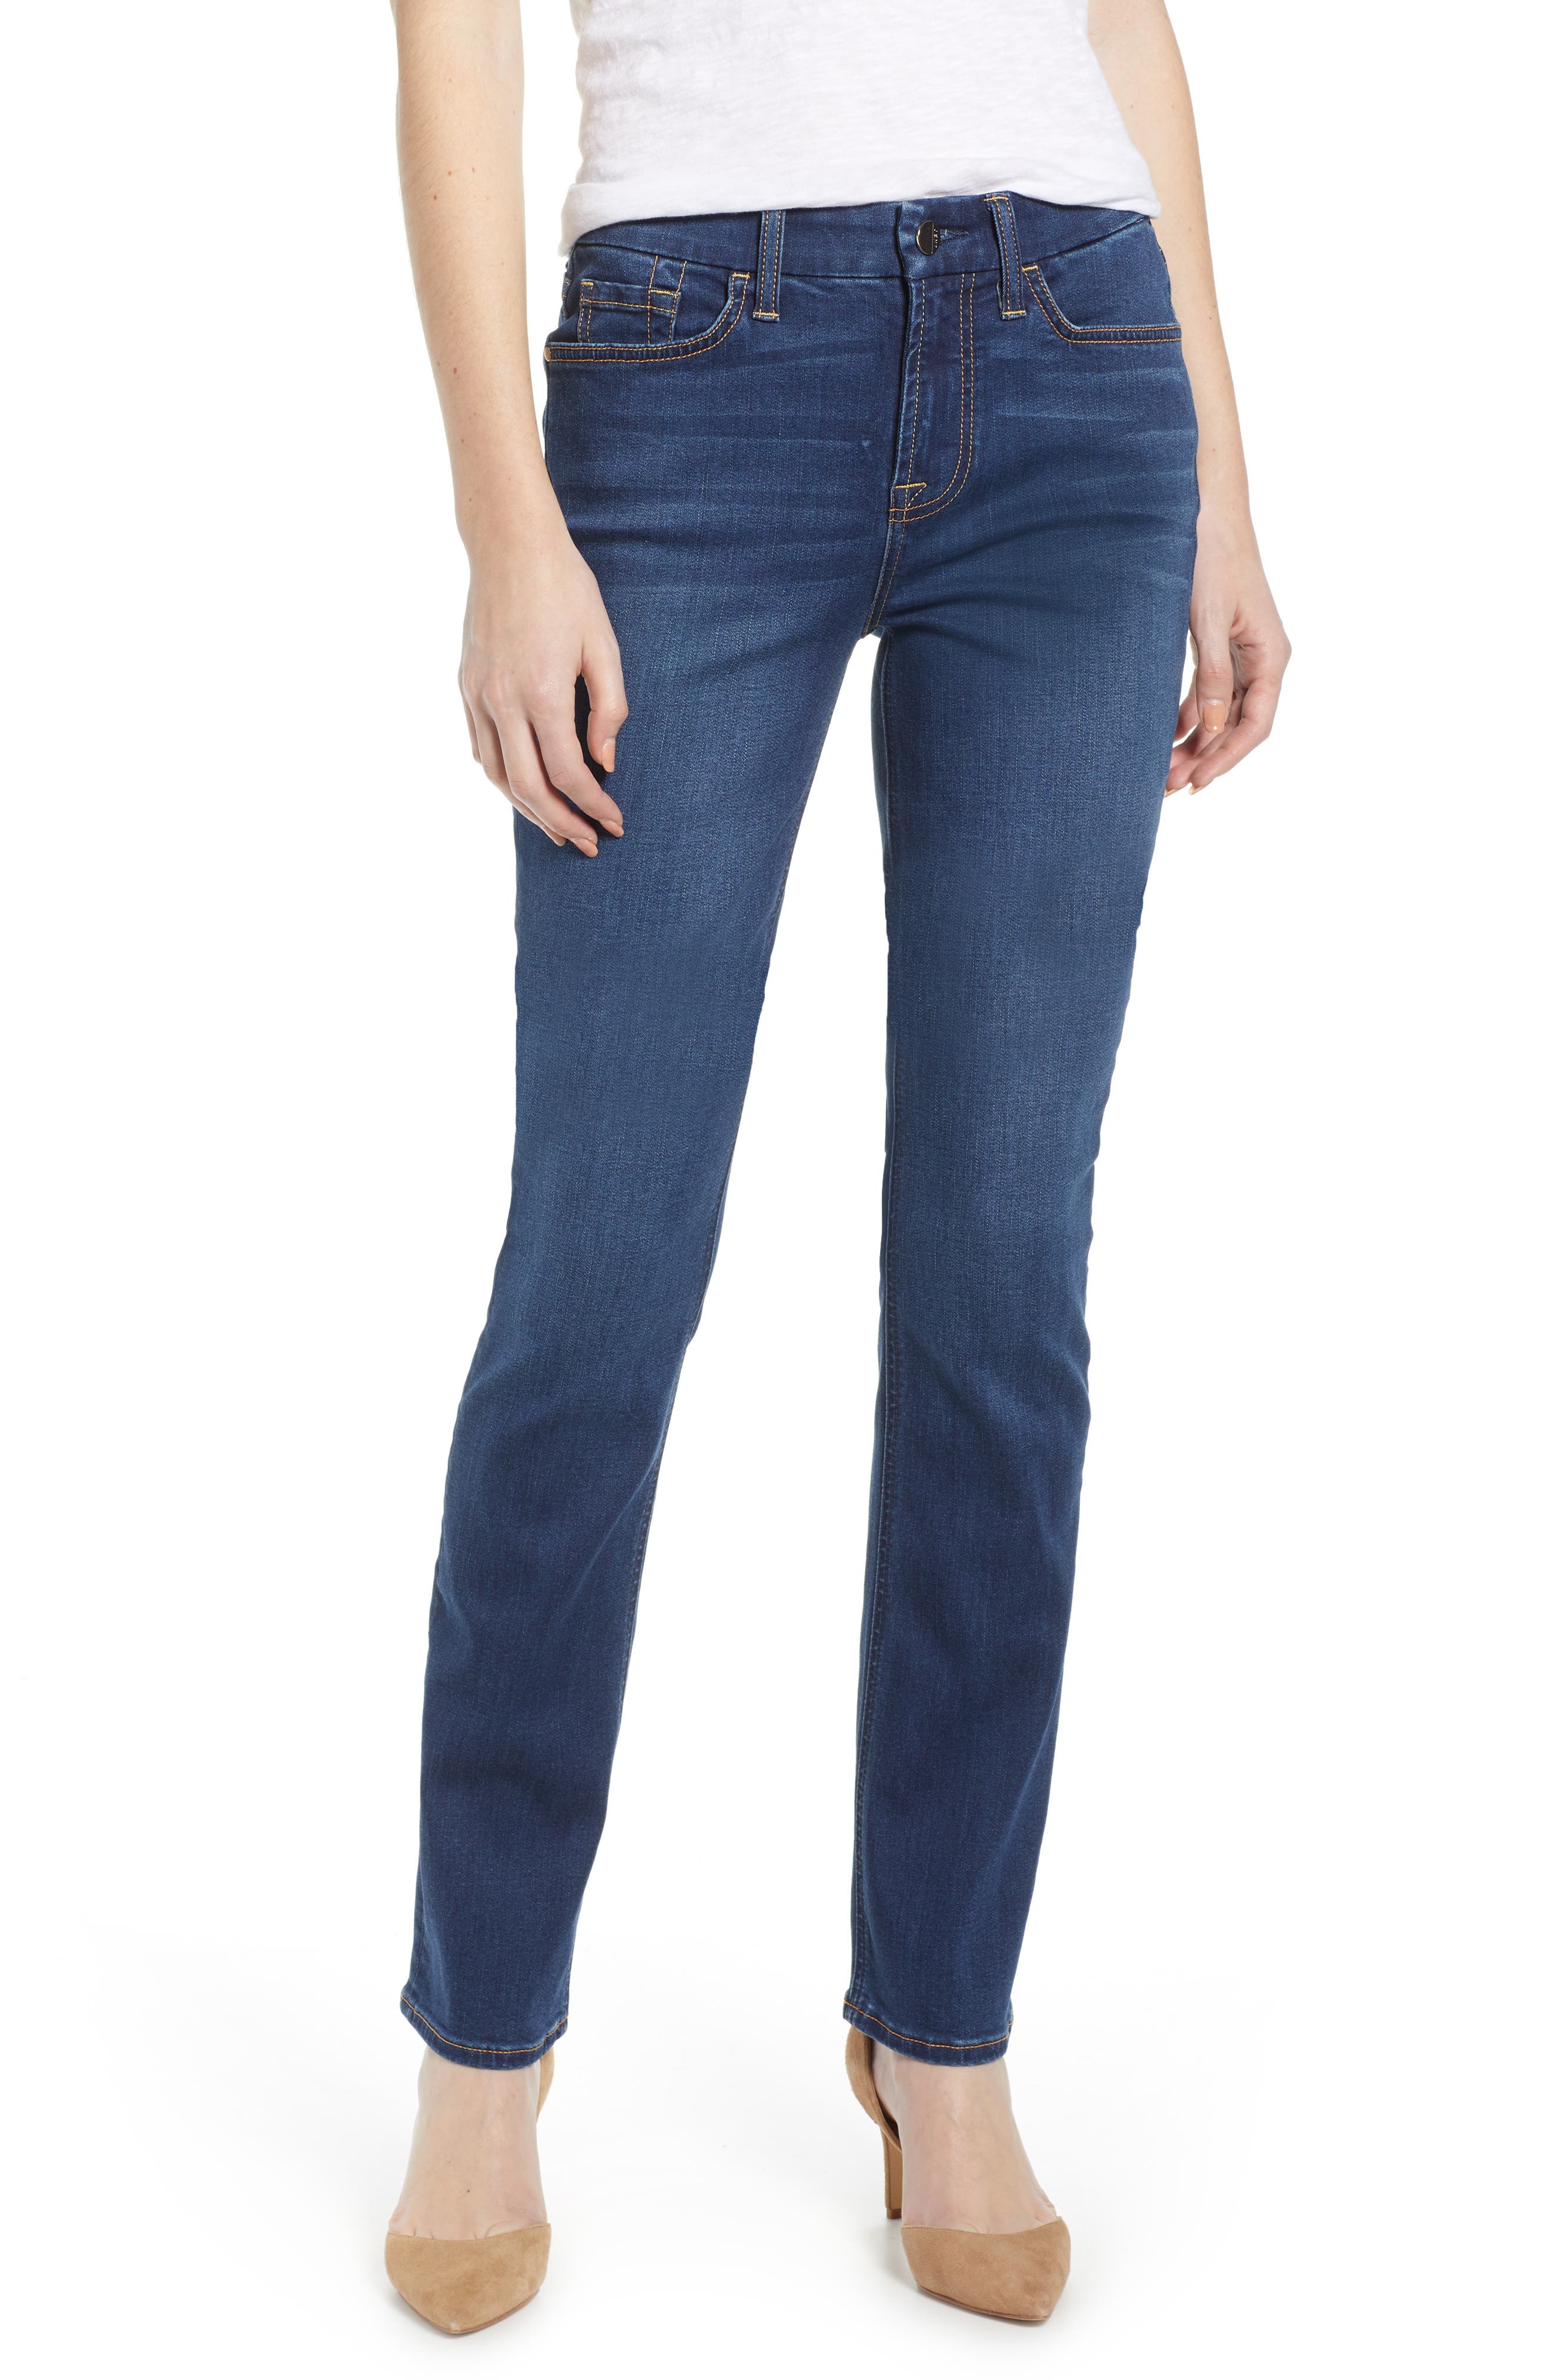 7 for all mankind straight jeans